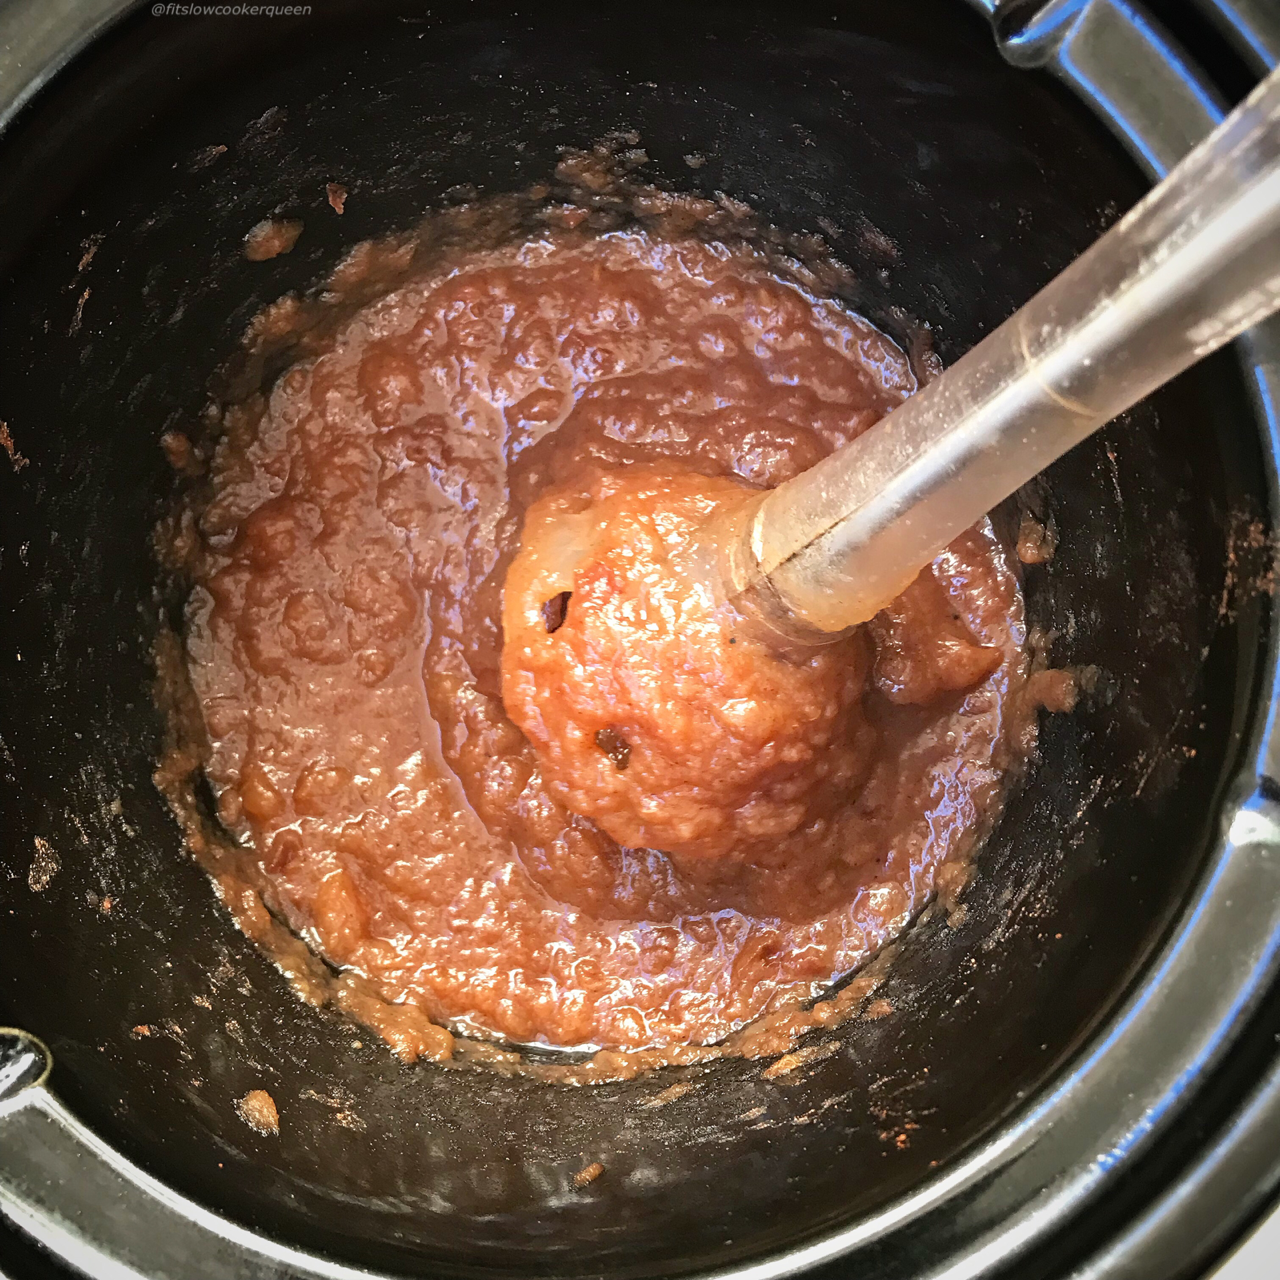 This healhty slow cooker apple butter recipe has NO ADDED SUGAR making it whole30 and paleo compliant while still being super easy.